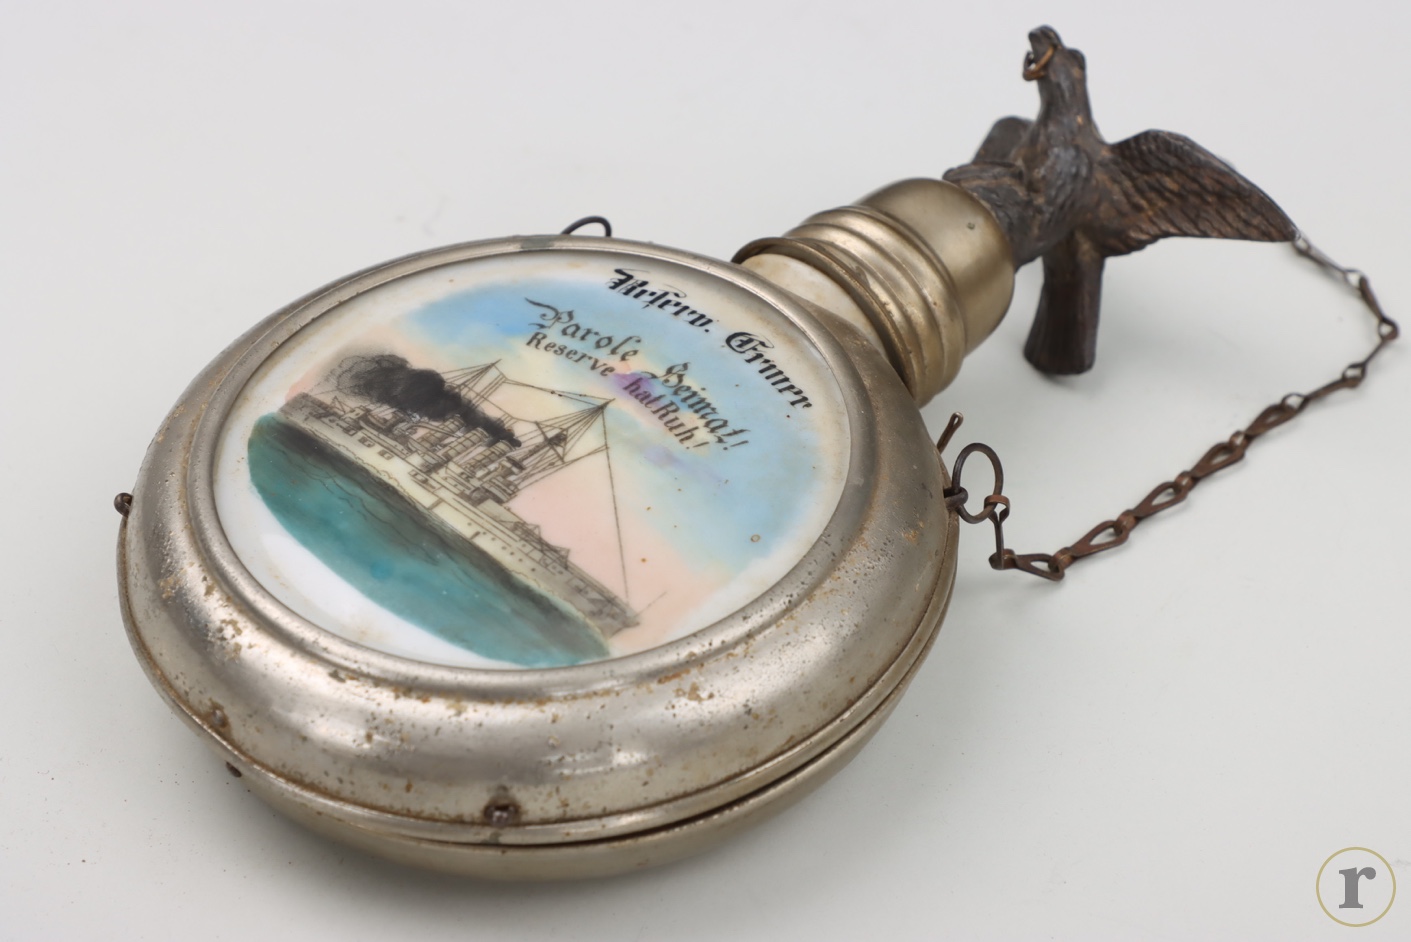 ratisbon's, Imperial Germany - Armeemodell I 1910 compass in case